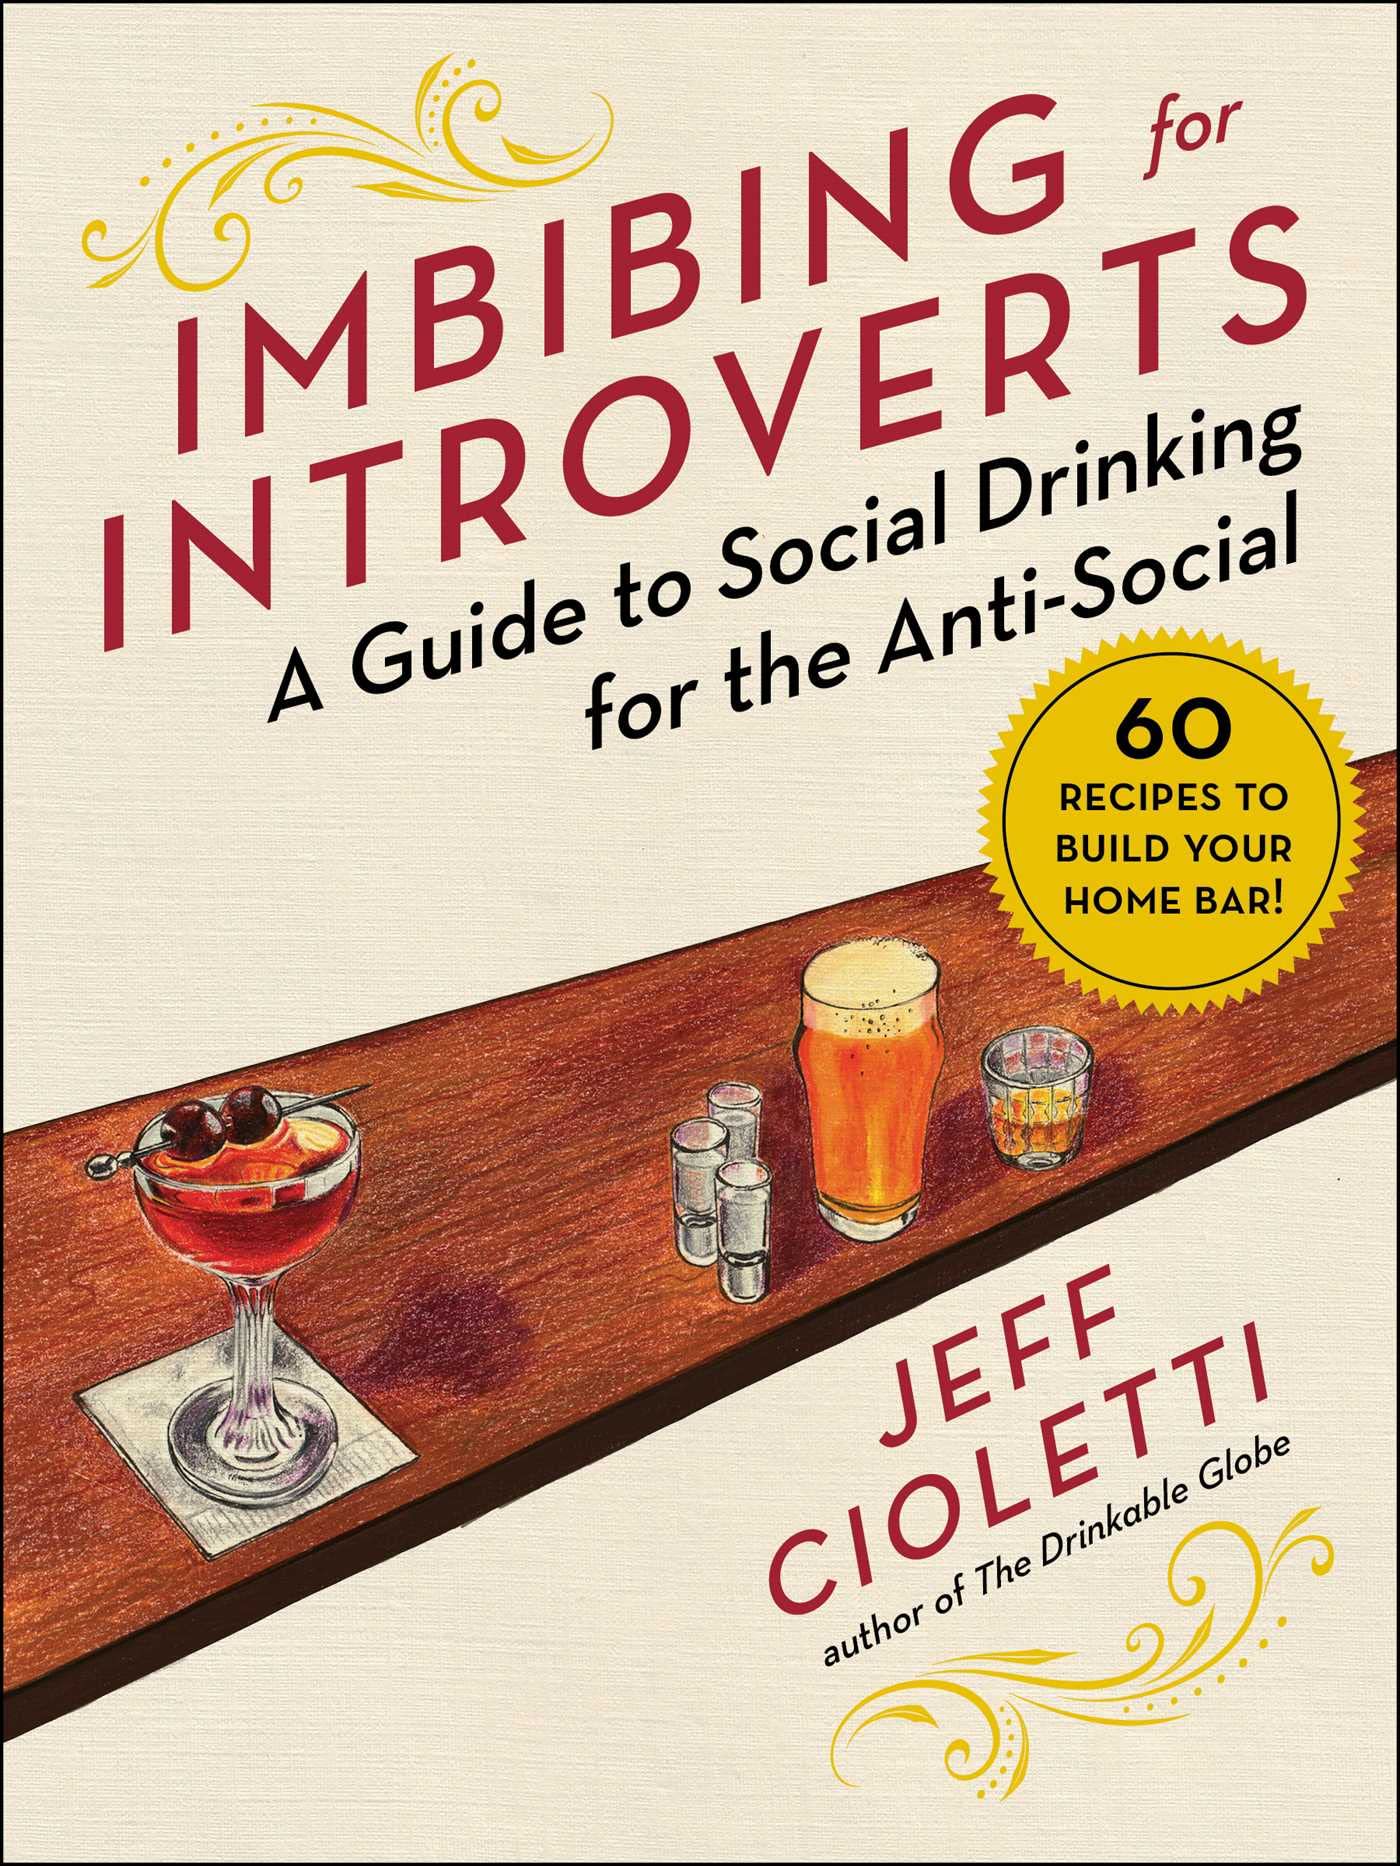 Imbibing for Introverts: A Guide to Social Drinking for the Anti-Social (Jeff Cioletti) *Signed*